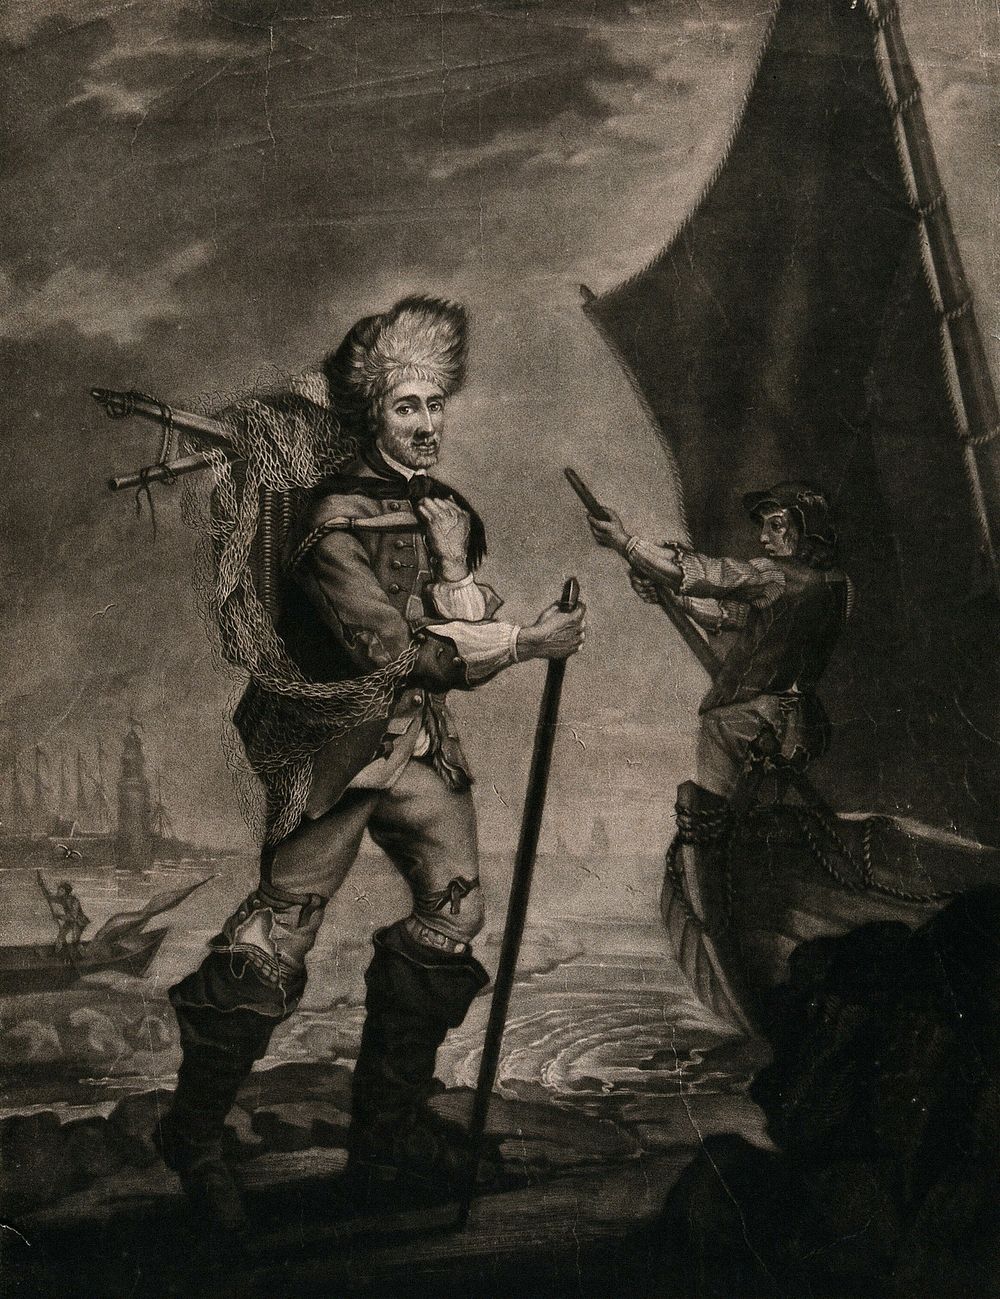 A fisherman is standing on a rock with his nets and baskets strapped to his back. Mezzotint by J. Jones after G. Carter.